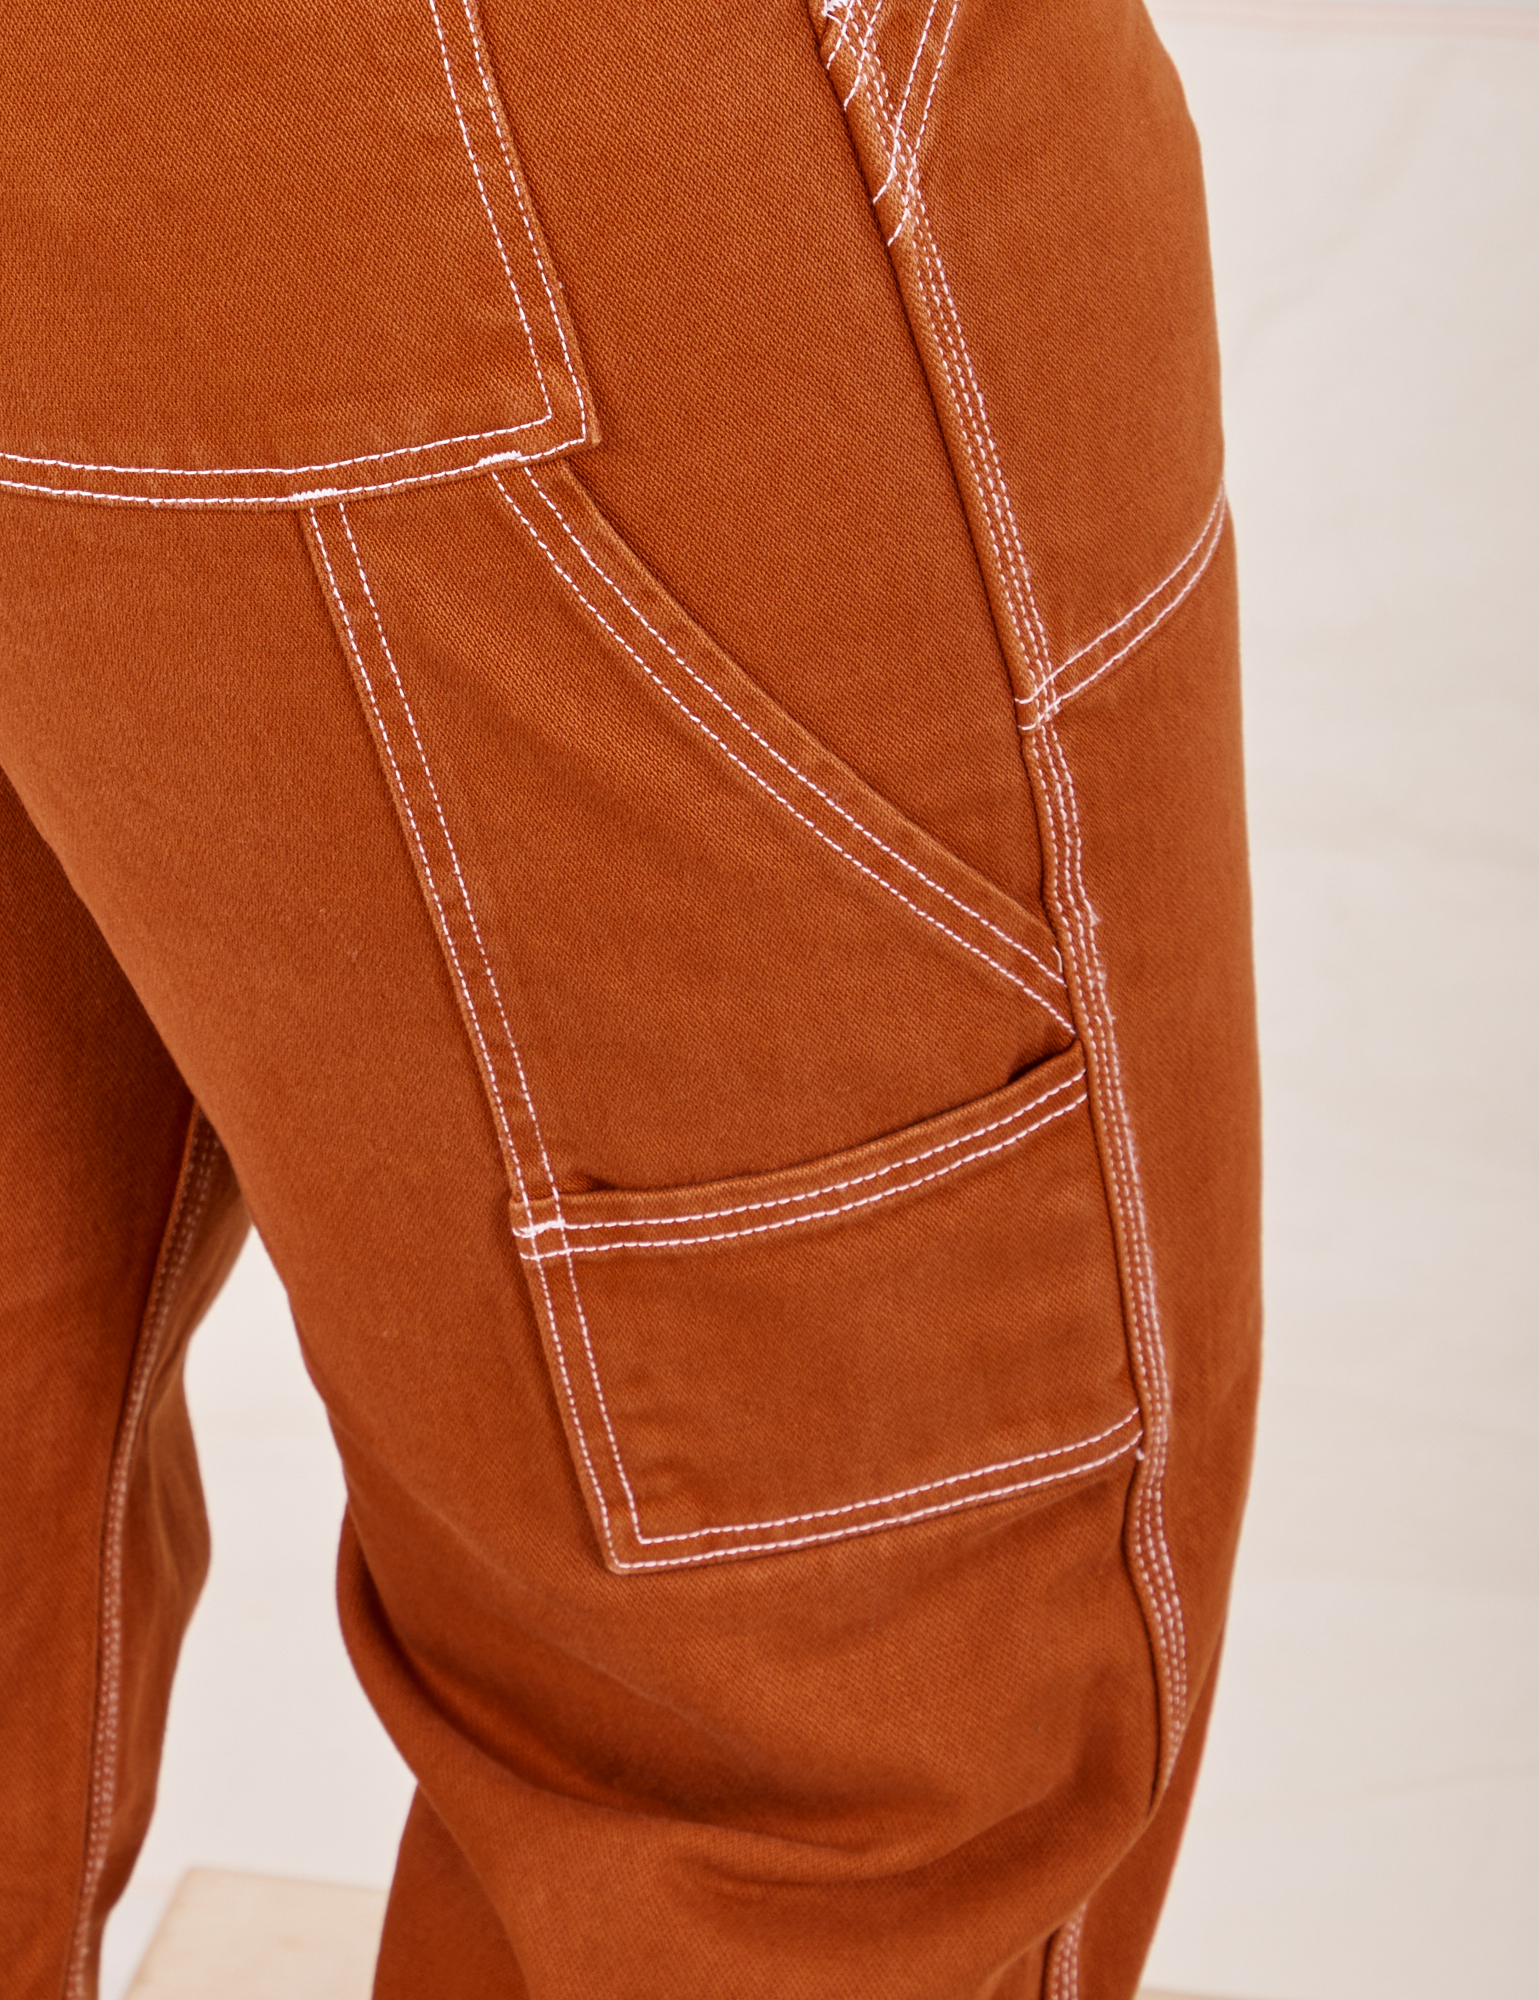 Carpenter Jeans in Burnt Terracotta pocket close up. White contrast top stitching.